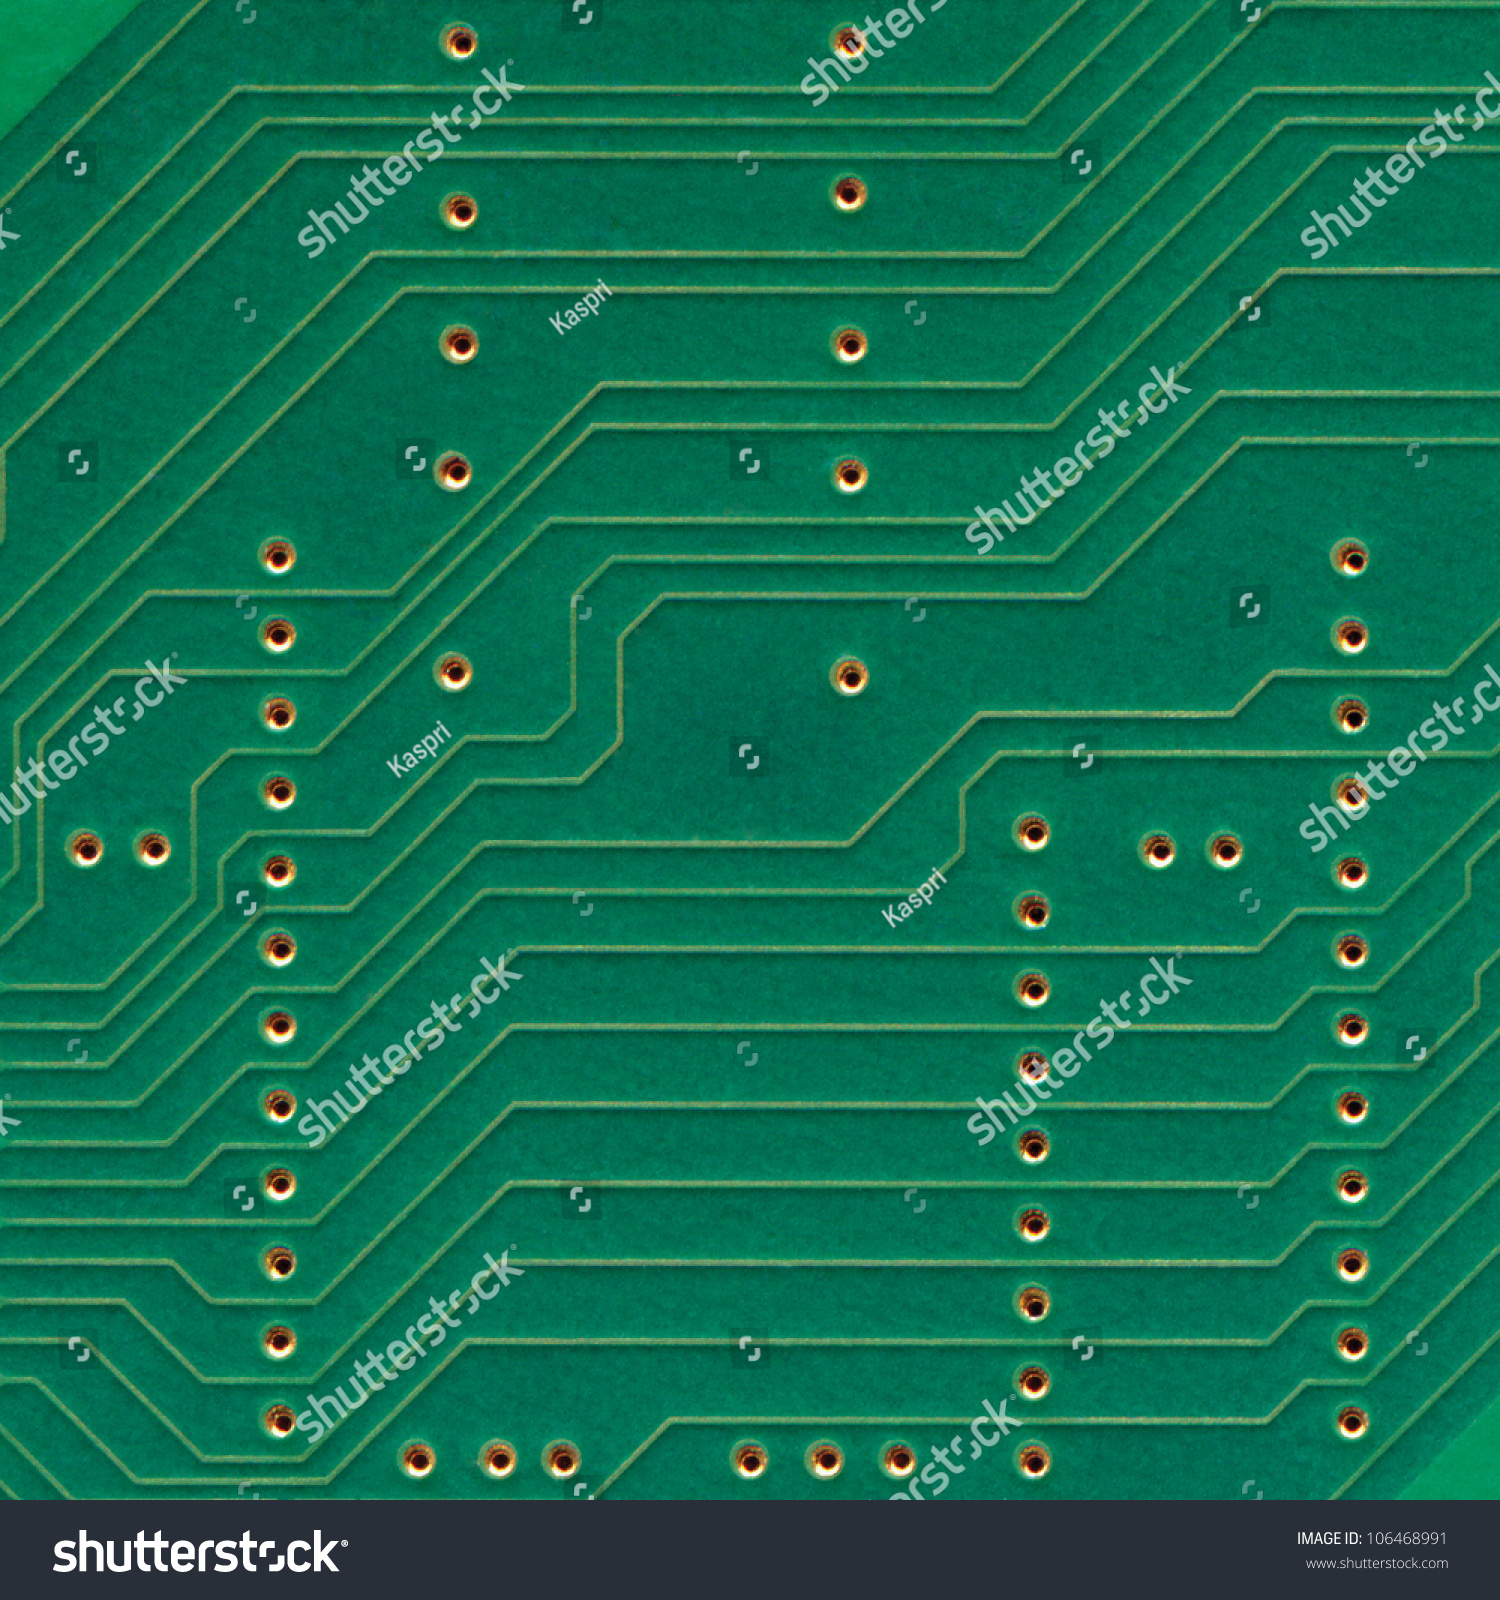 Printed Circuit Board Electronic Components Plate Stock Photo ...